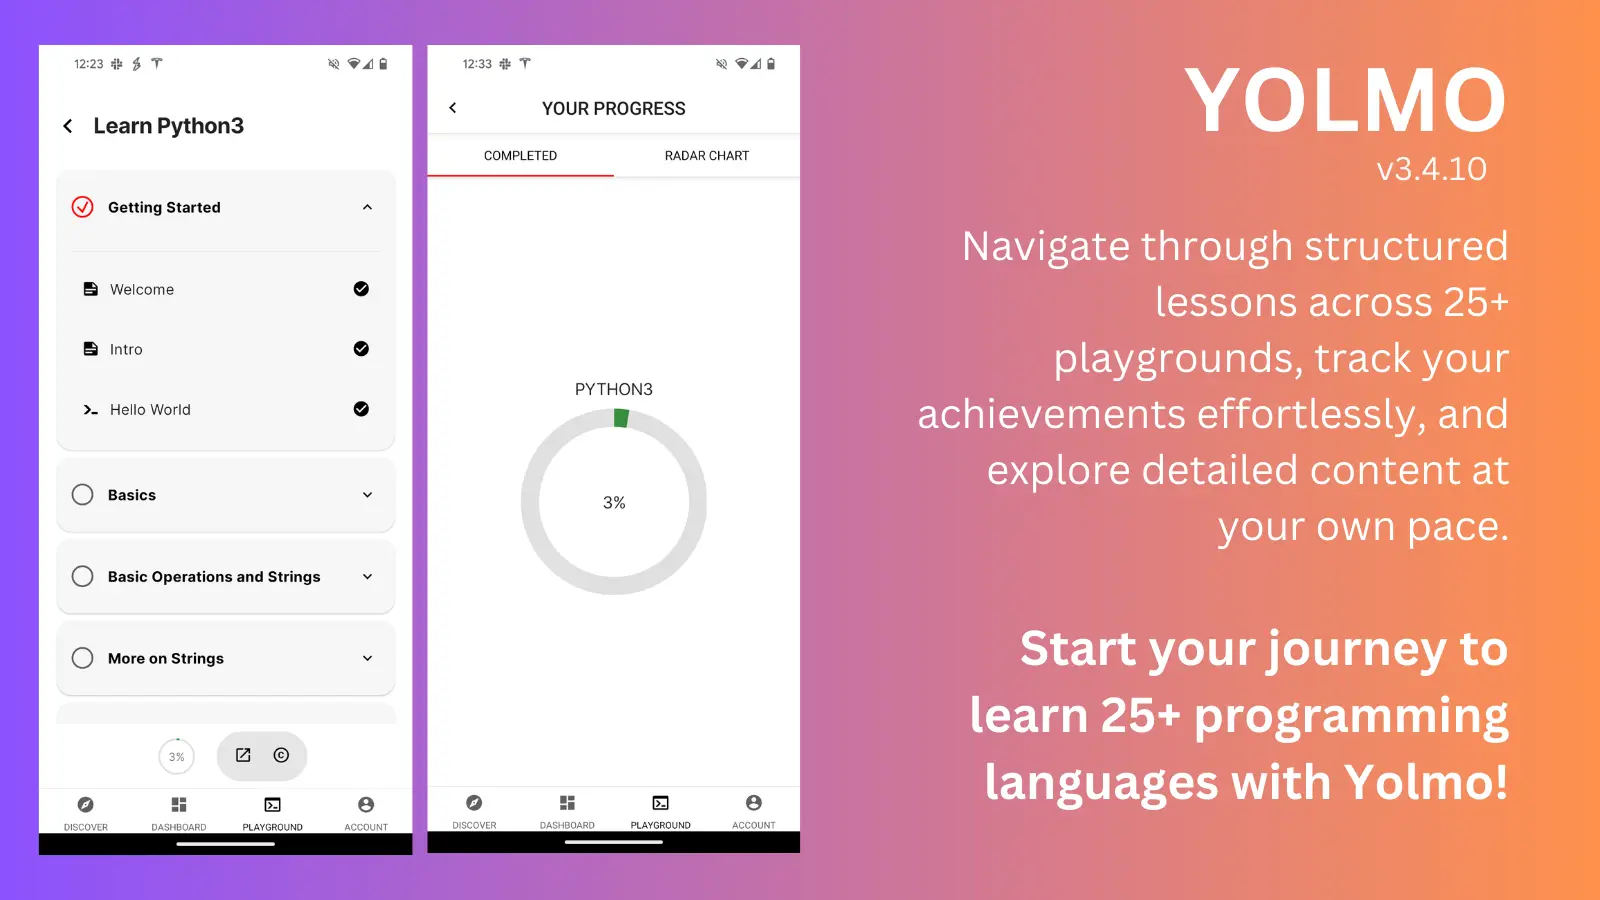 Navigate through structured lessons across 25+ playgrounds, track your achievements effortlessly, and explore detailed content at your own pace.